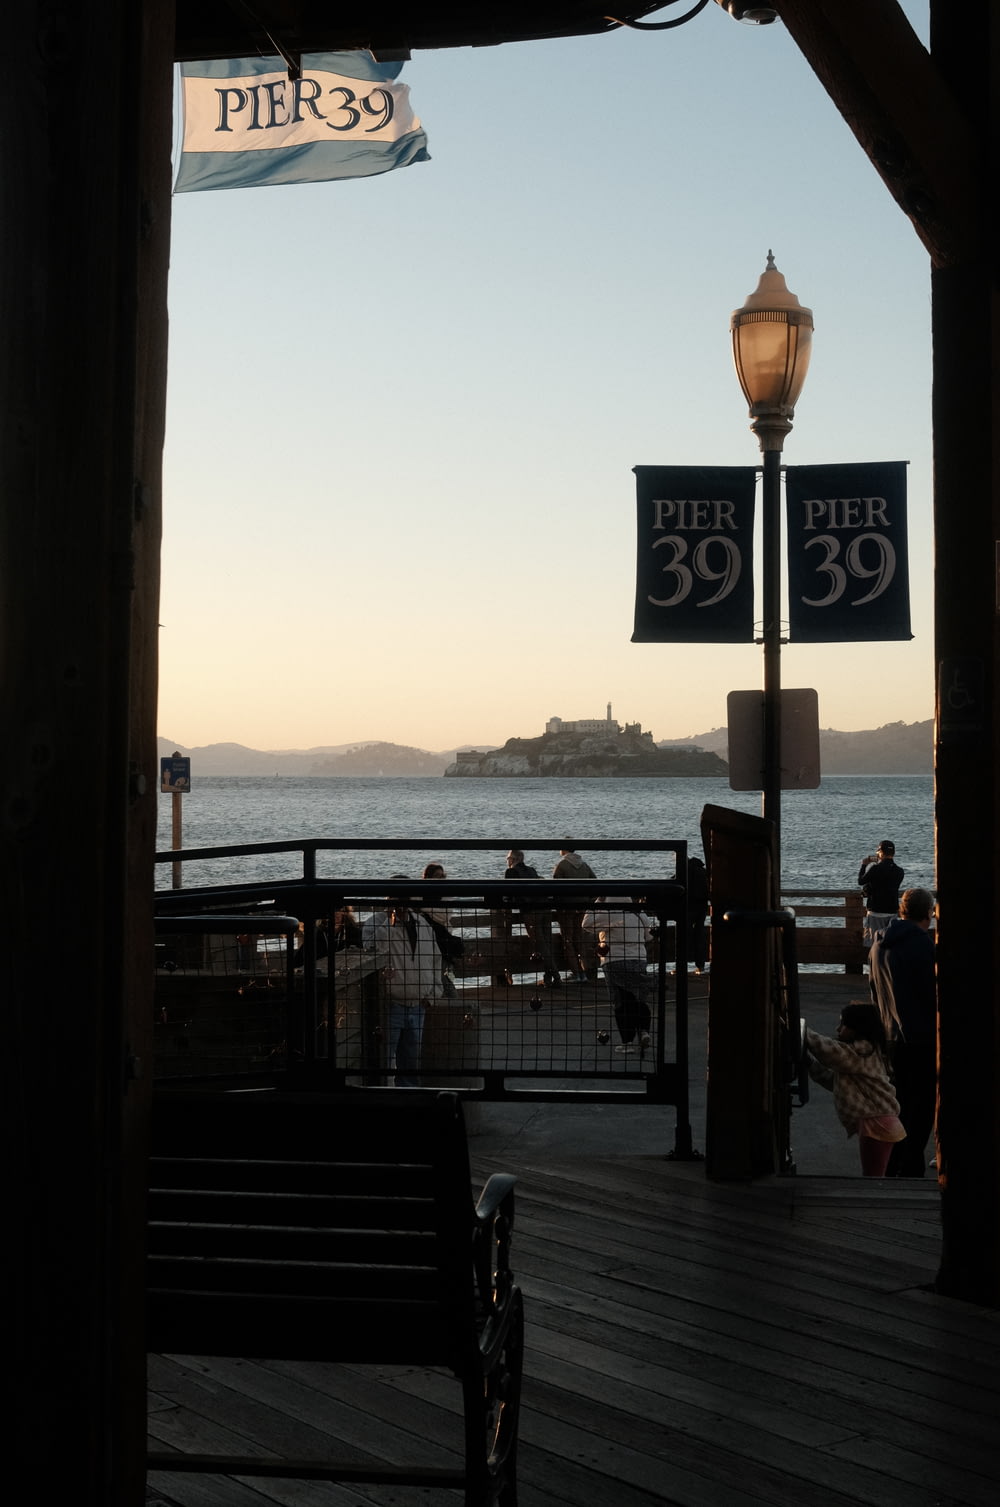 a pier with a sign that says pier 39 and a sign that says pier 39